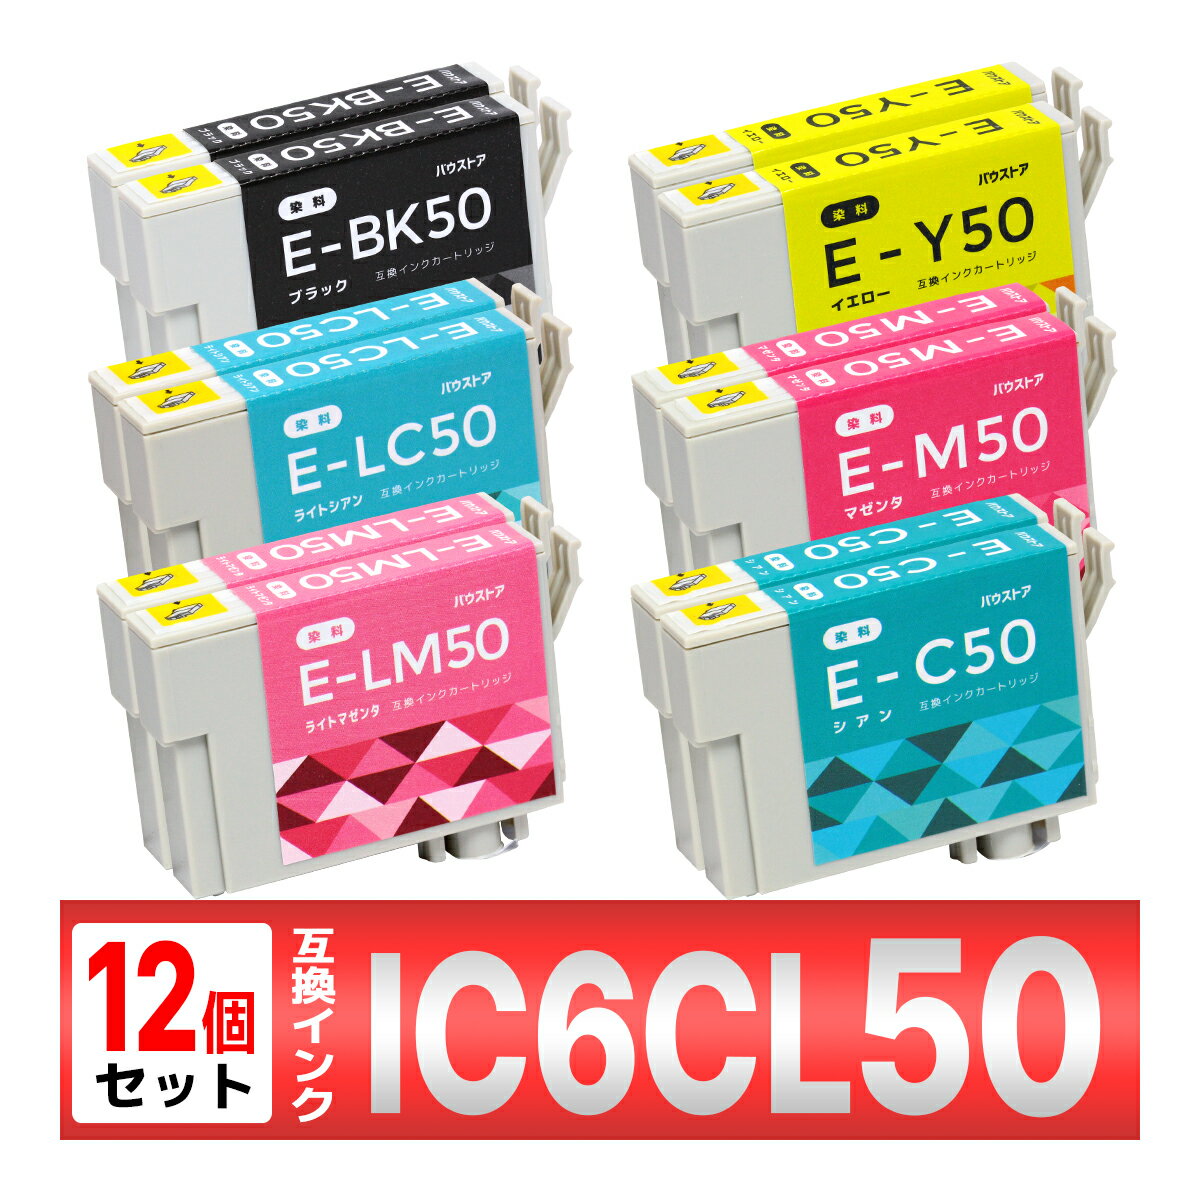 IC6CL50 IC6CL50A2 IC50 風船 互換インク 12